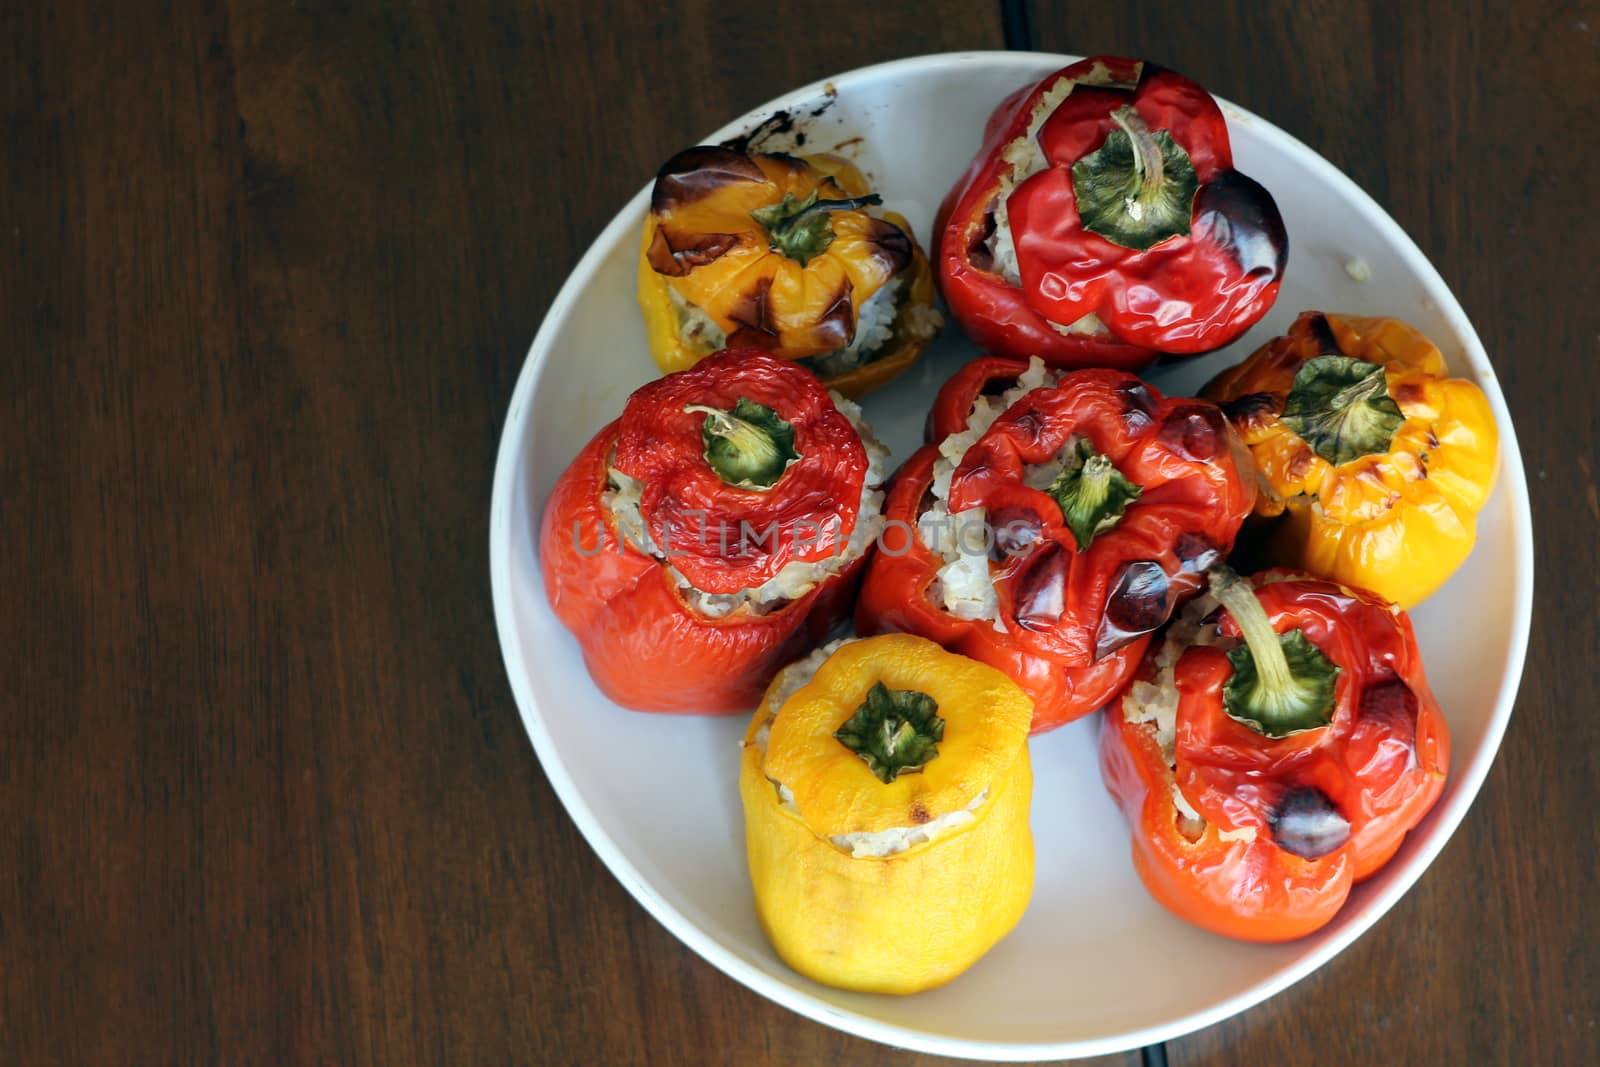 Roasted peppers with minced meat and rice inside by sanzios